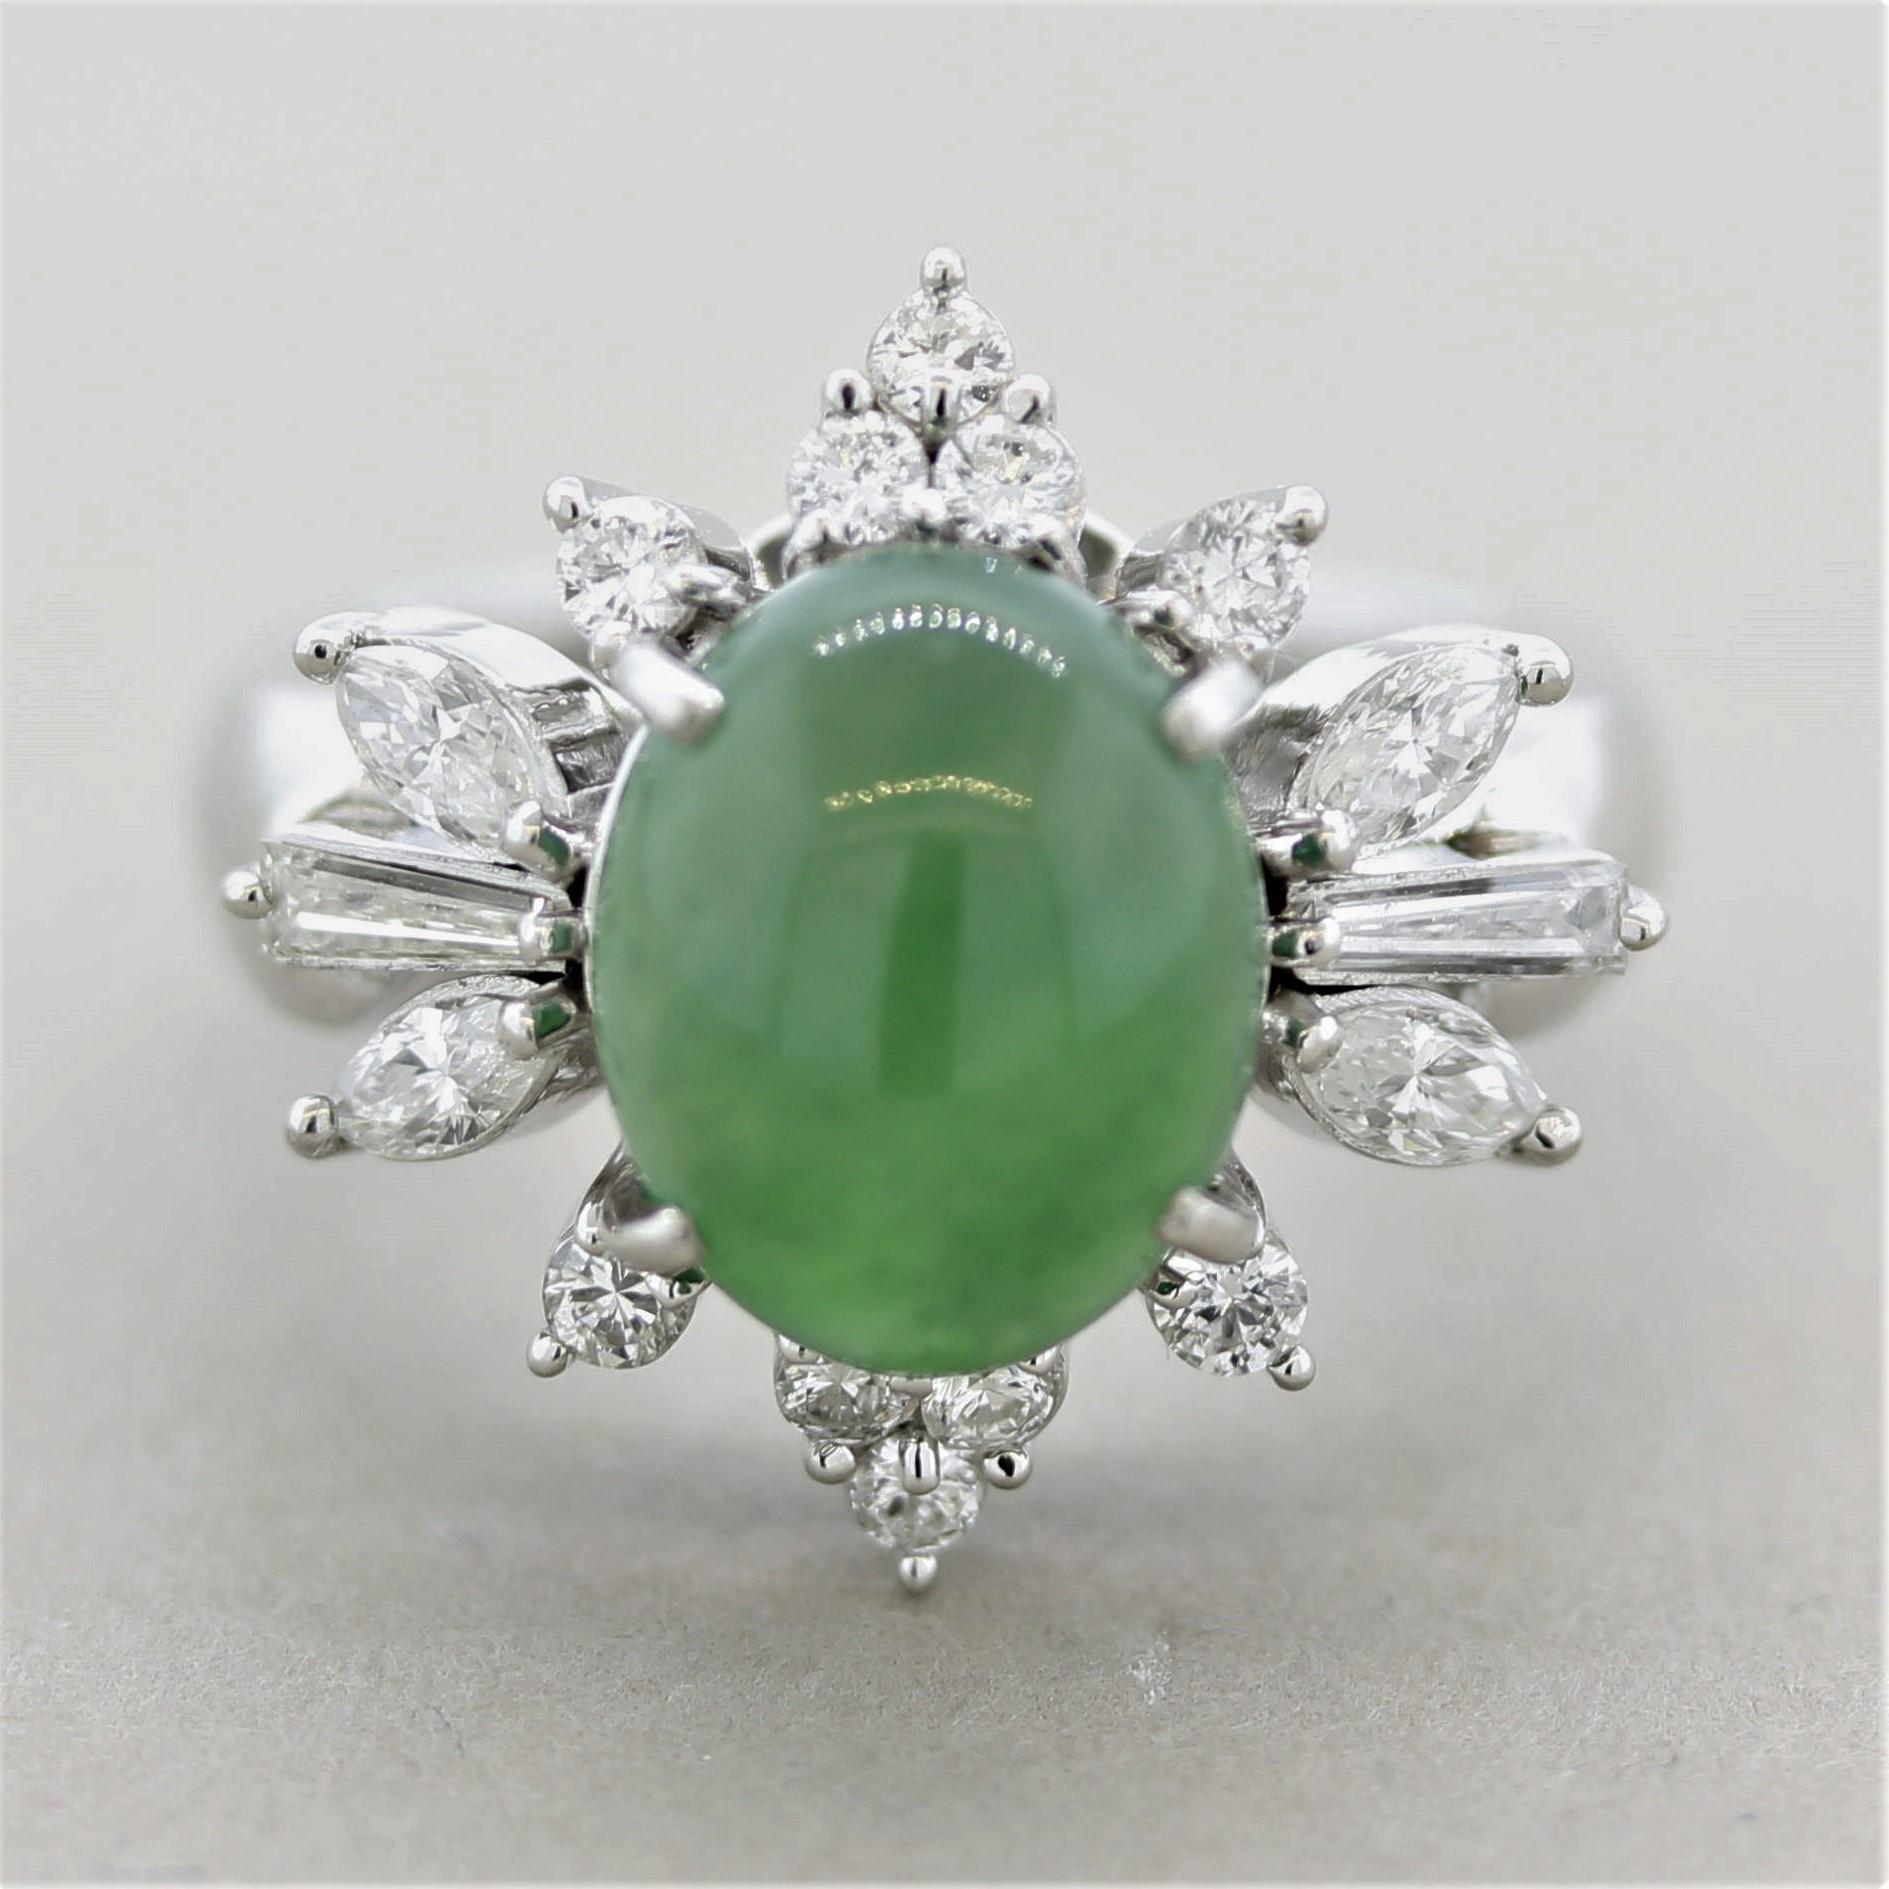 A lovely floral designed ring featuring a 4.36 carat jadeite jade. The jade is natural/untreated and certified by the GIA. It has an even green color and is translucent making the stone appear to glow under a light! It is accented by 0.74 carats of